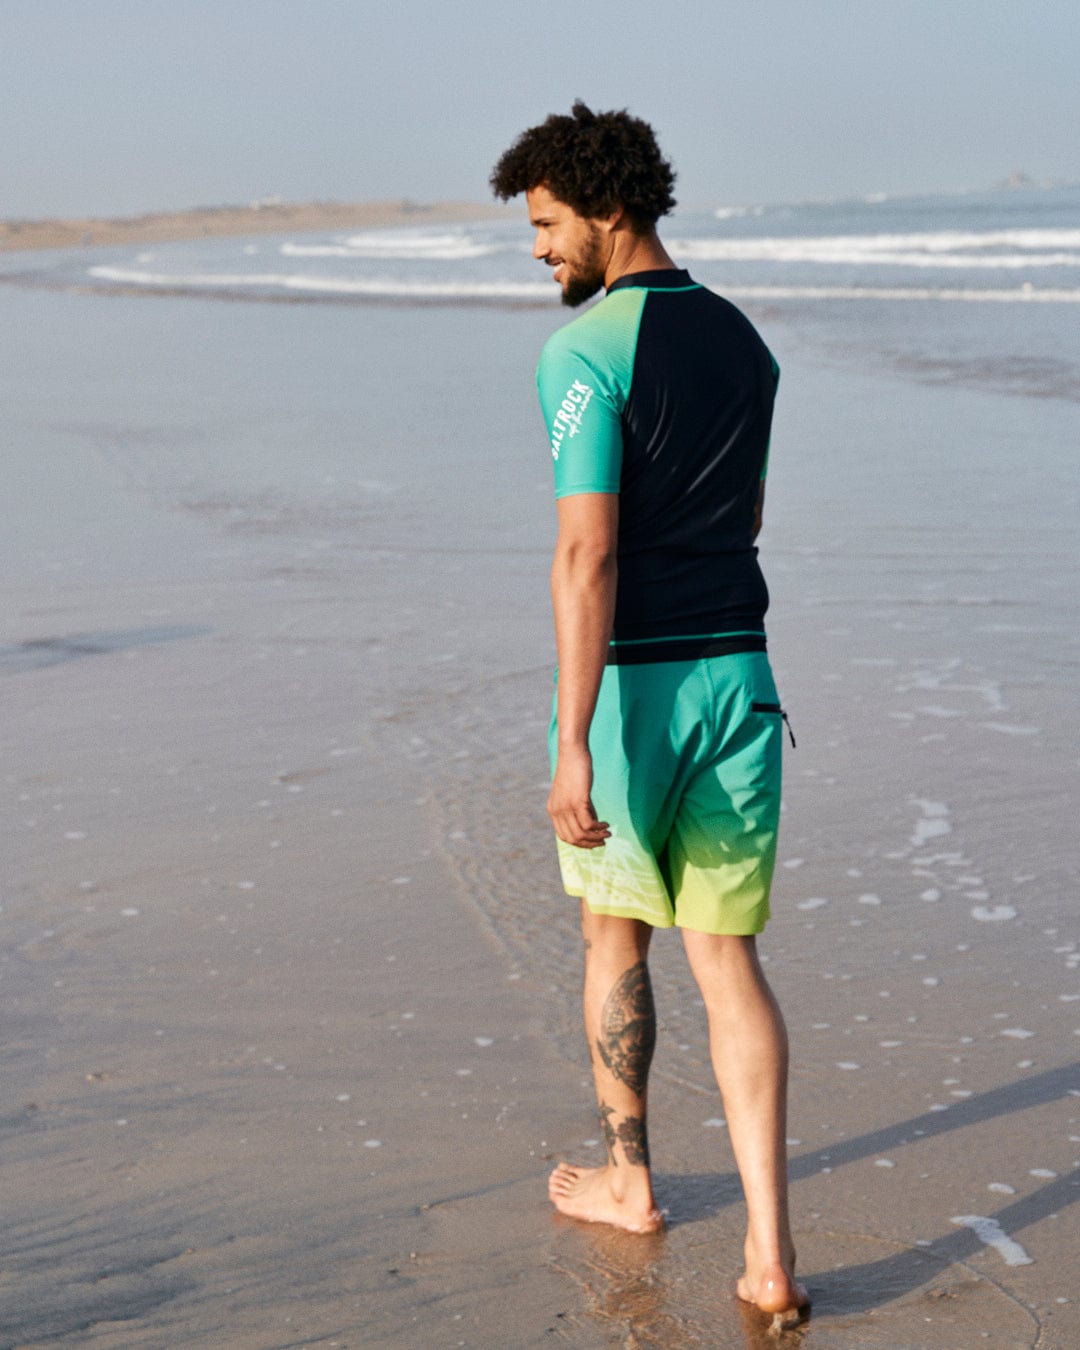 A man with curly hair, wearing a Saltrock DNA Wave - Recycled Mens Short Sleeve Rashvest in Black/Green and board shorts, walks along a sandy beach, glancing over his shoulder.